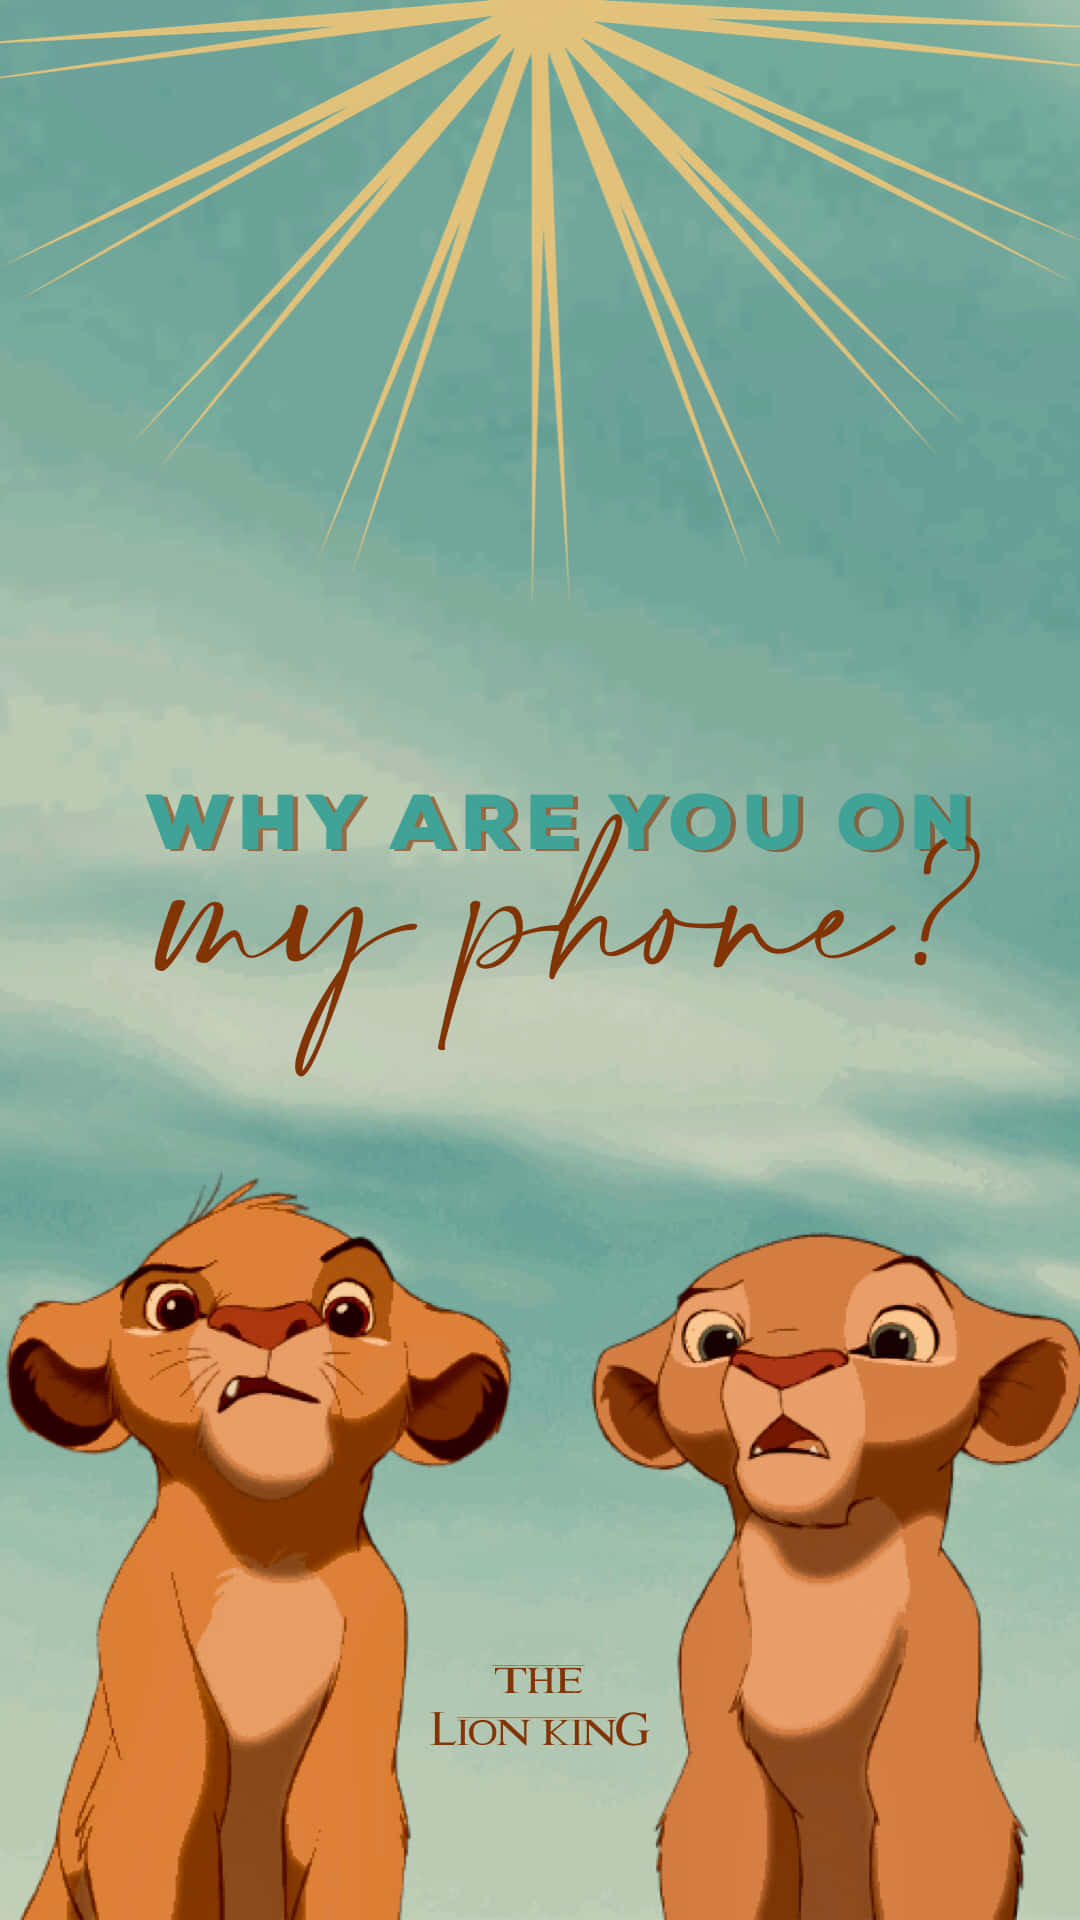 Timon and Pumbaa enjoying their time in the African Savanna Wallpaper